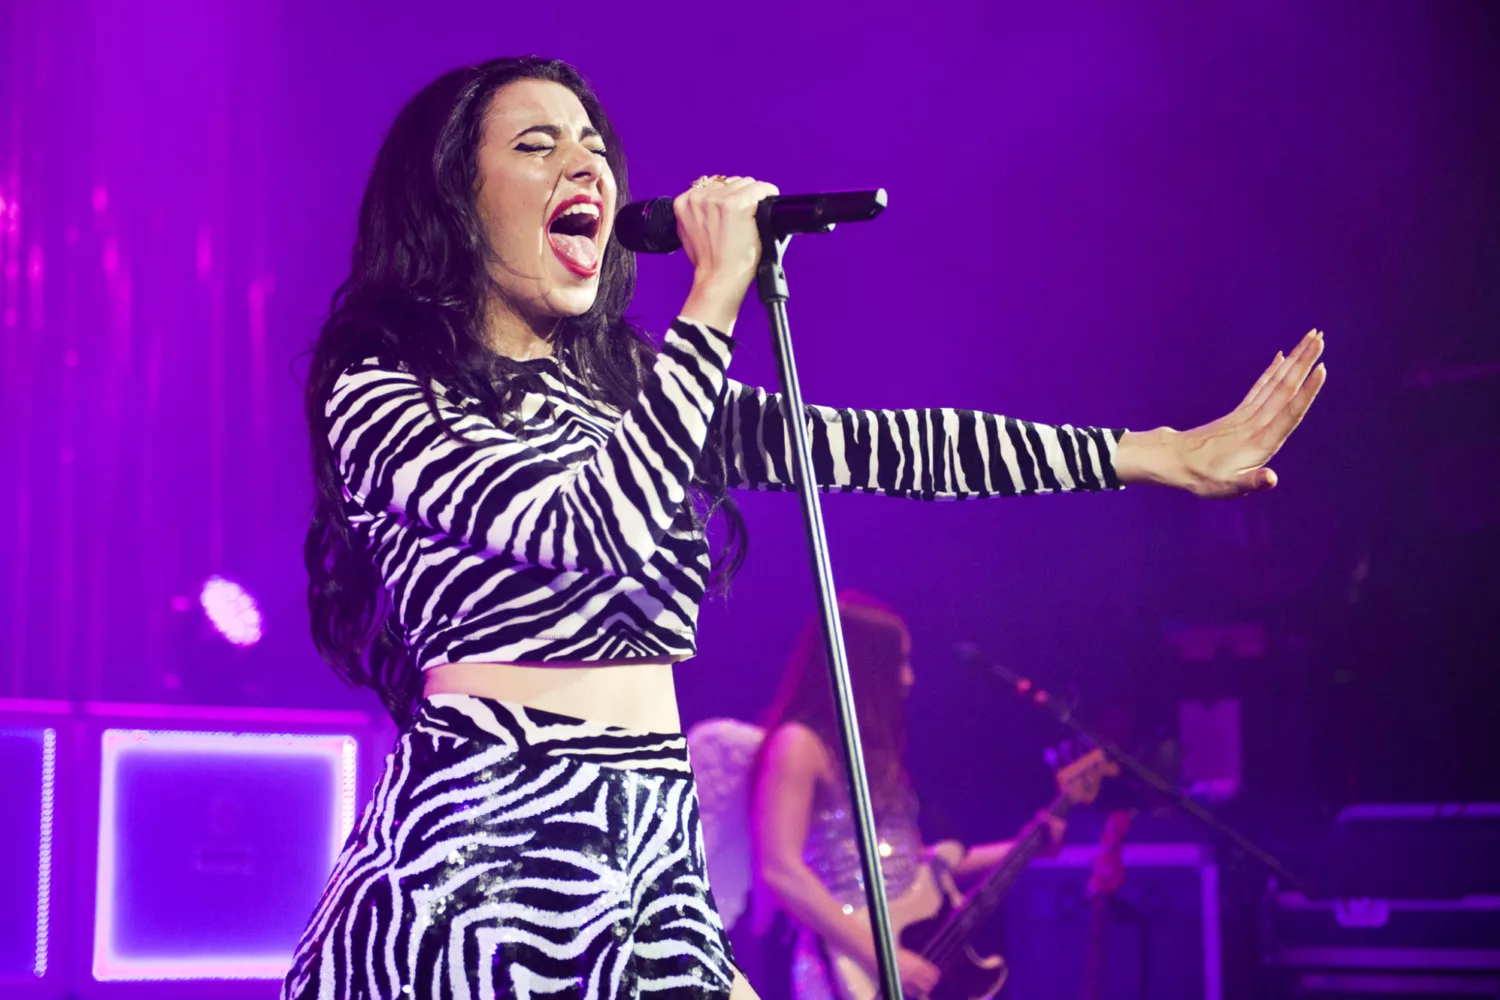 Charli XCX says her new album is the “most pop thing I’ve done”